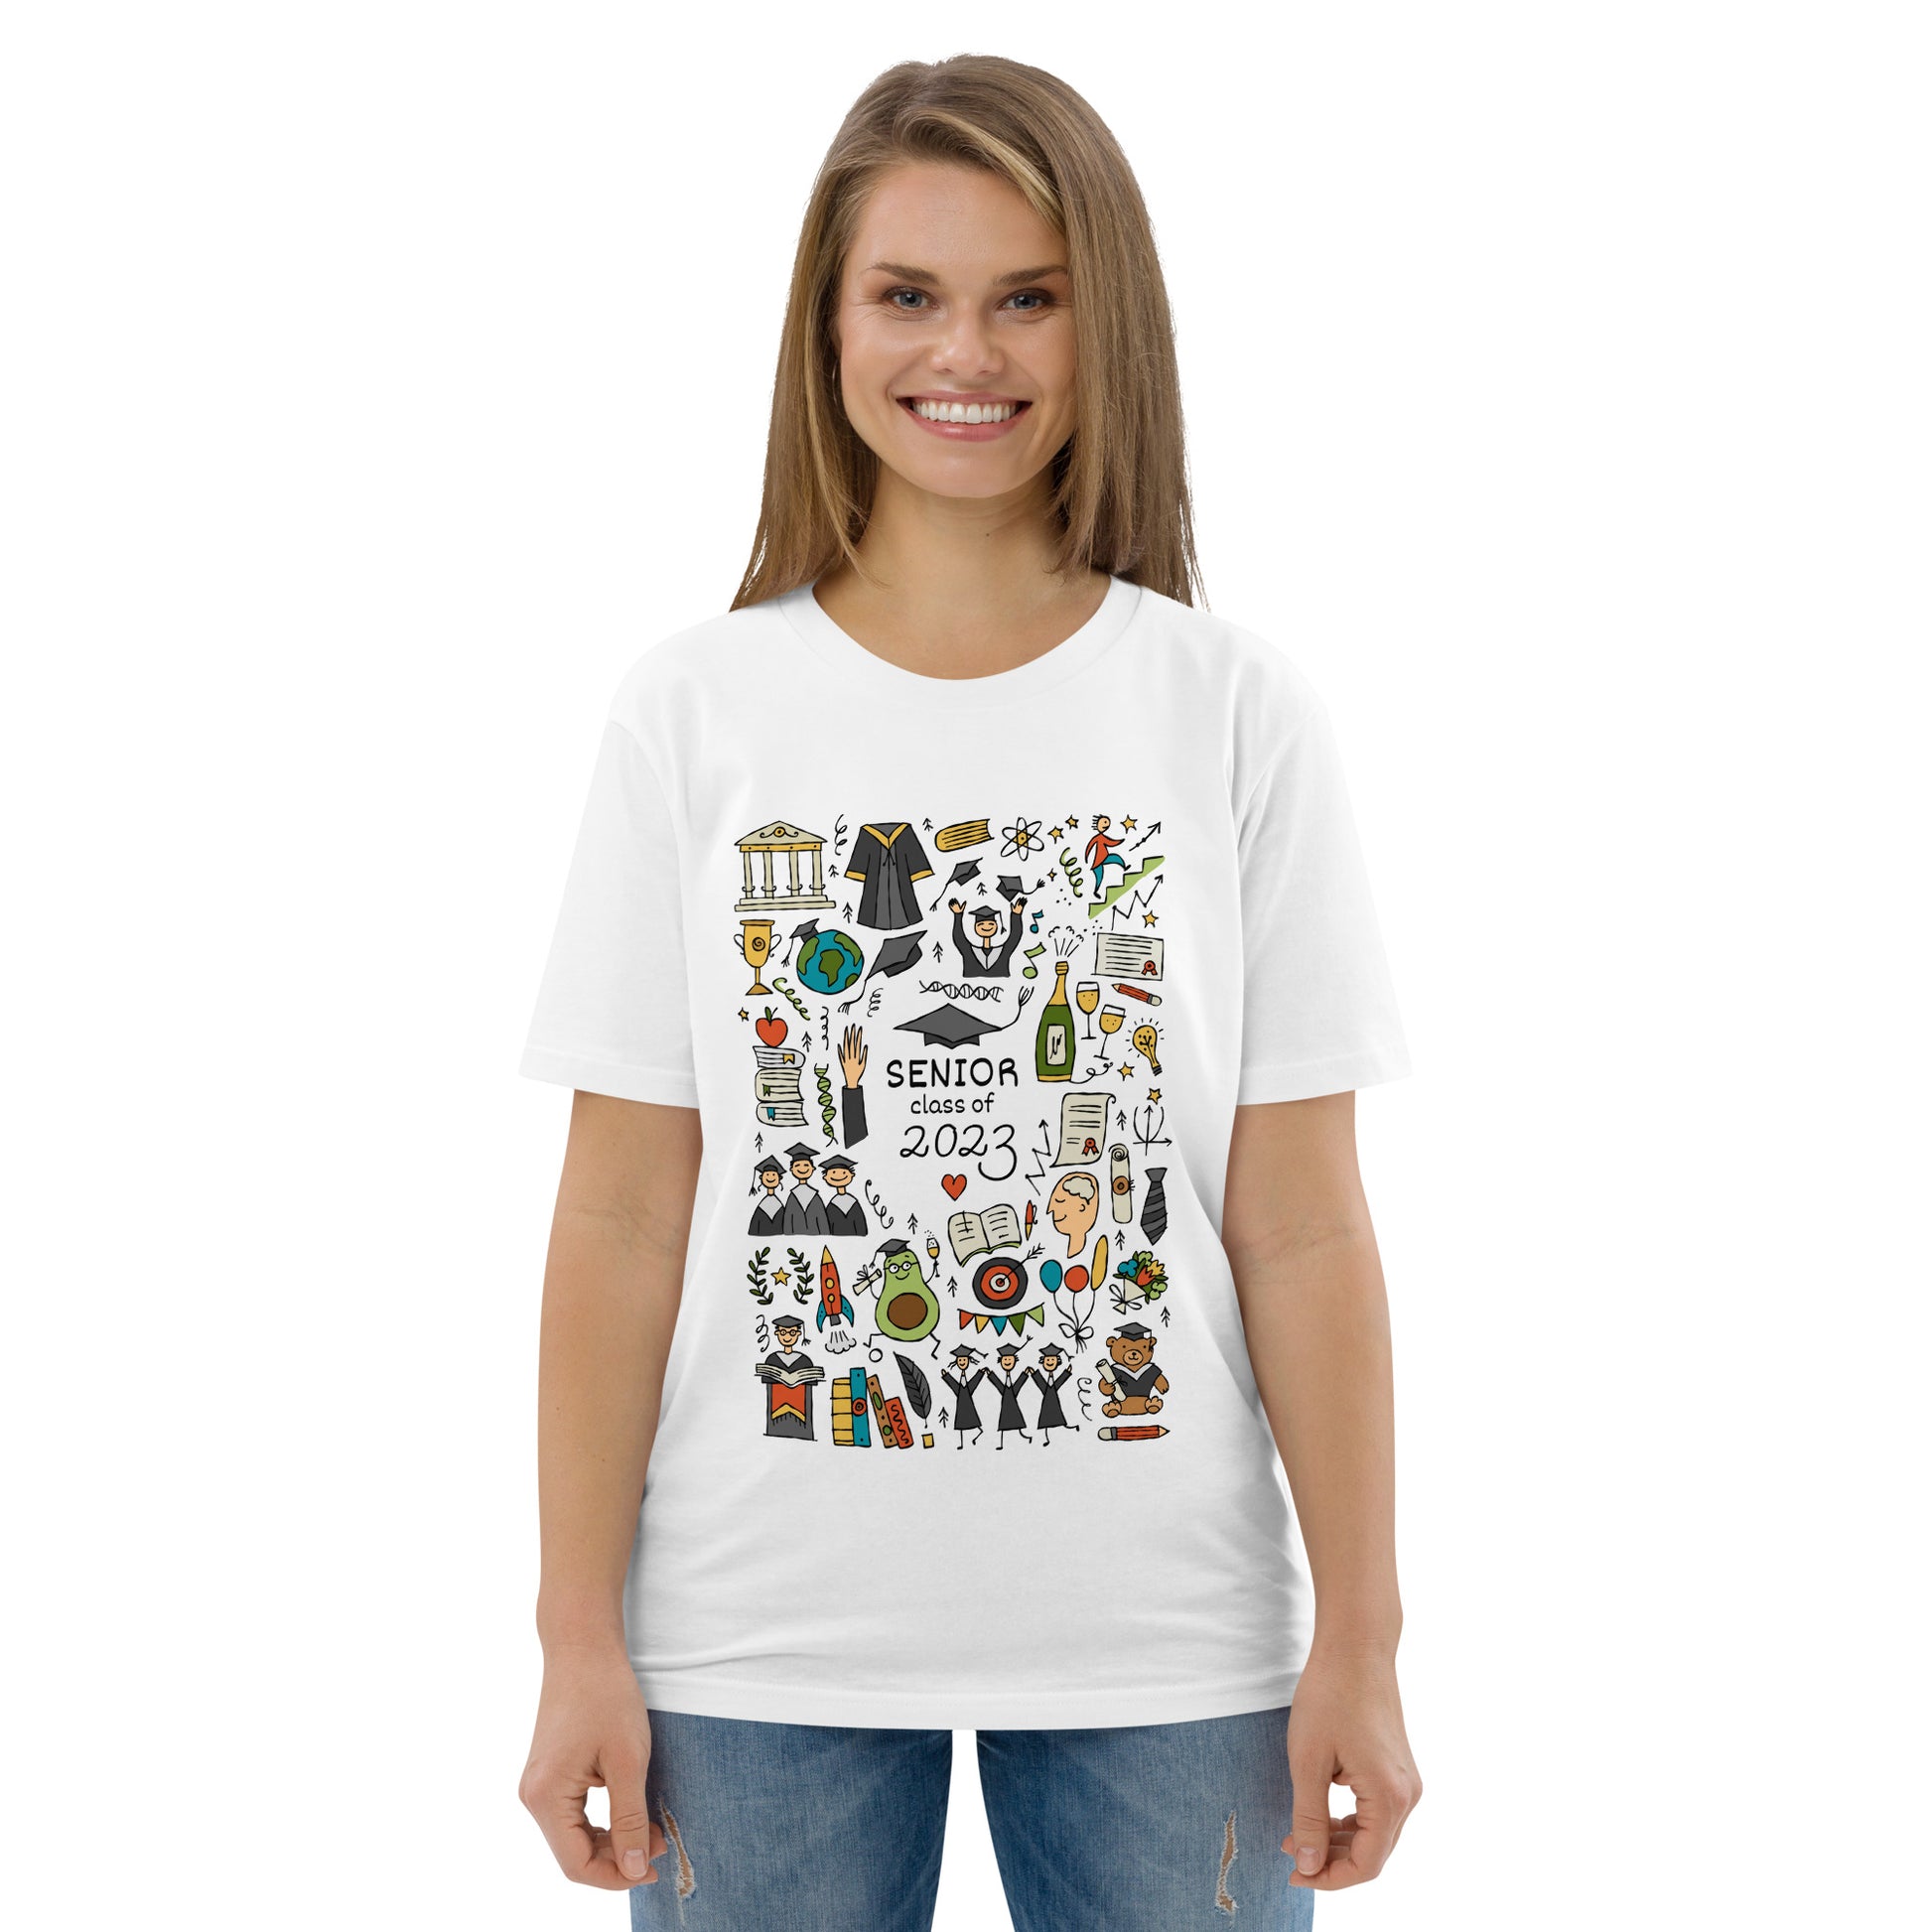 Girl in graduation white t-shirt with funny designer print featuring graduates in hats and mantles, holiday-themed motifs, and a graduation teddy bear. Personalise it with your text